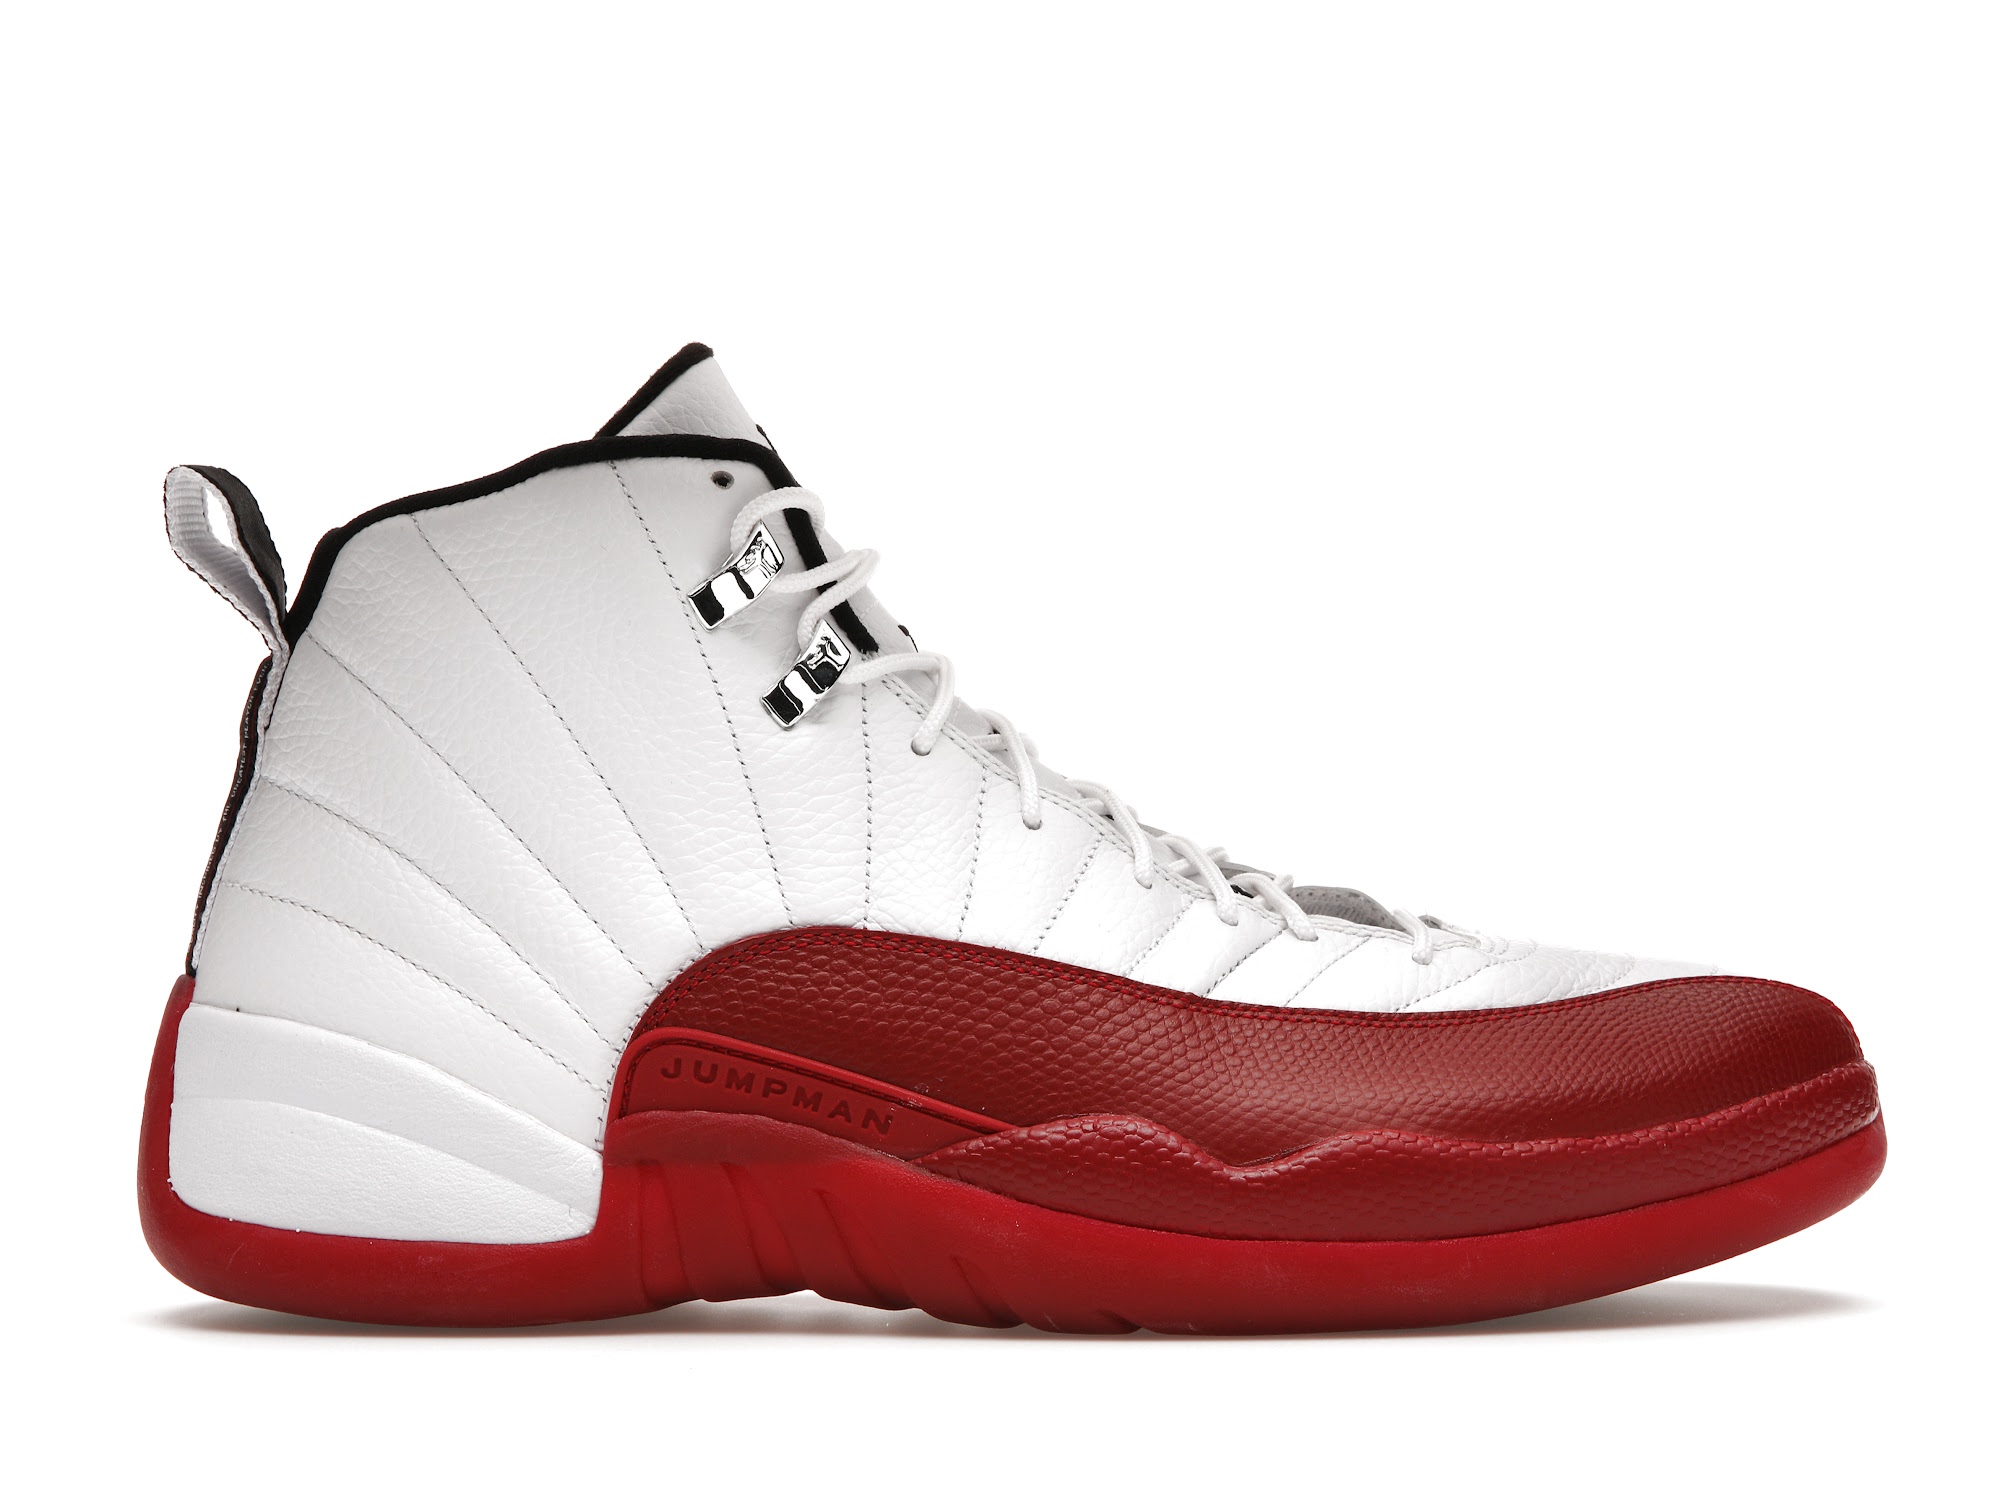 red in white 12s